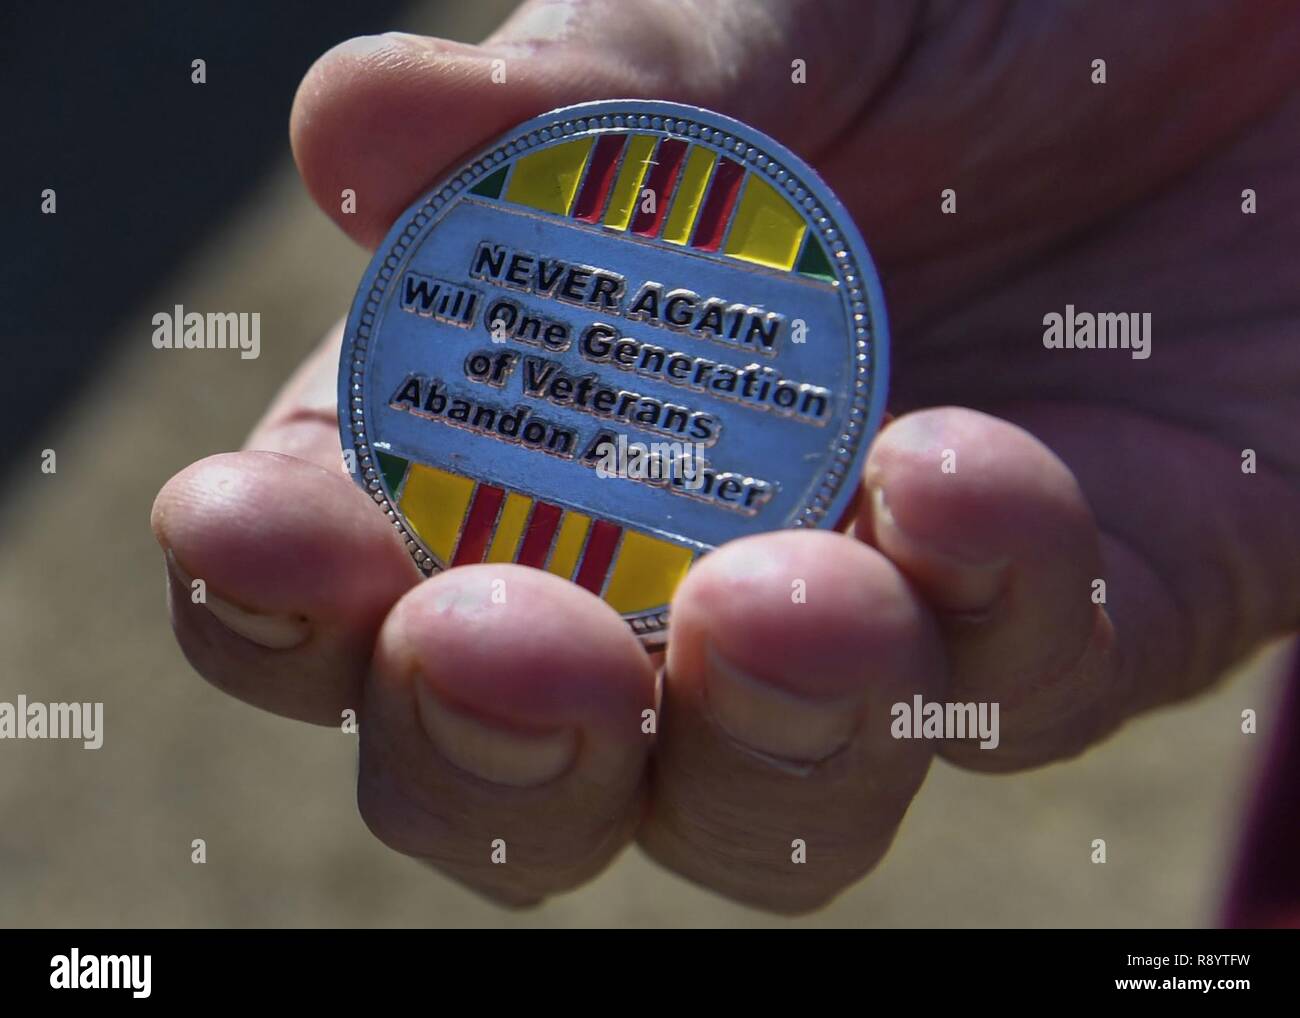 Retired U.S. Air Force Capt. William Robinson, longest surviving enlisted prisoner of war, holds a Vietnam veteran coin after an award ceremony here, March 17, 2017. Robinson was a POW for nearly eight years before being released. Now, Robinson speaks about his experience with community and military members across the country. Stock Photo